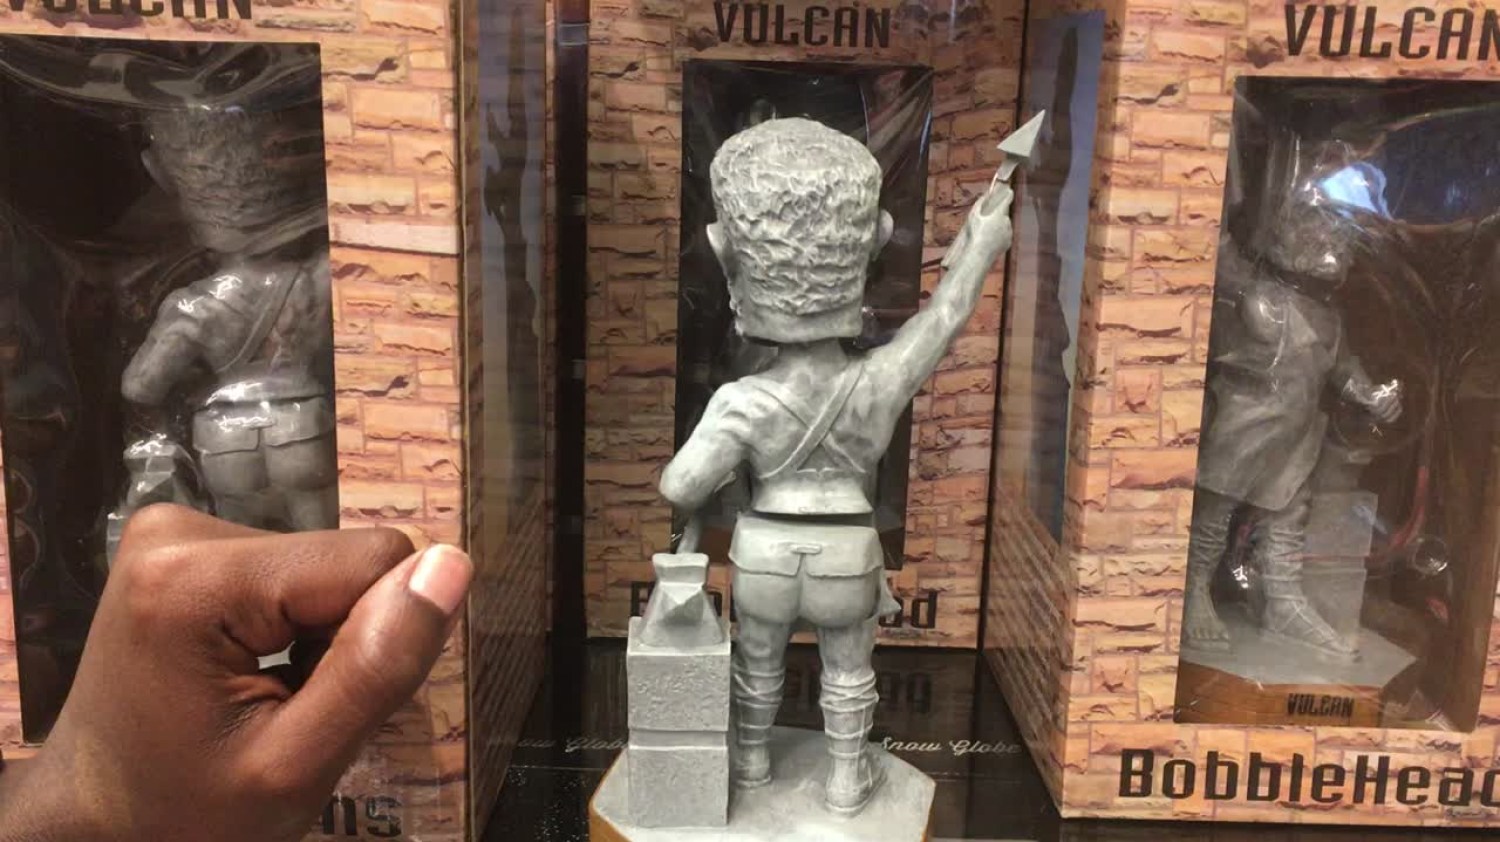 img 9472 hd.original Birmingham's Bobblehead Vulcan is now part of the Bobblehead Hall Fame in Milwaukee